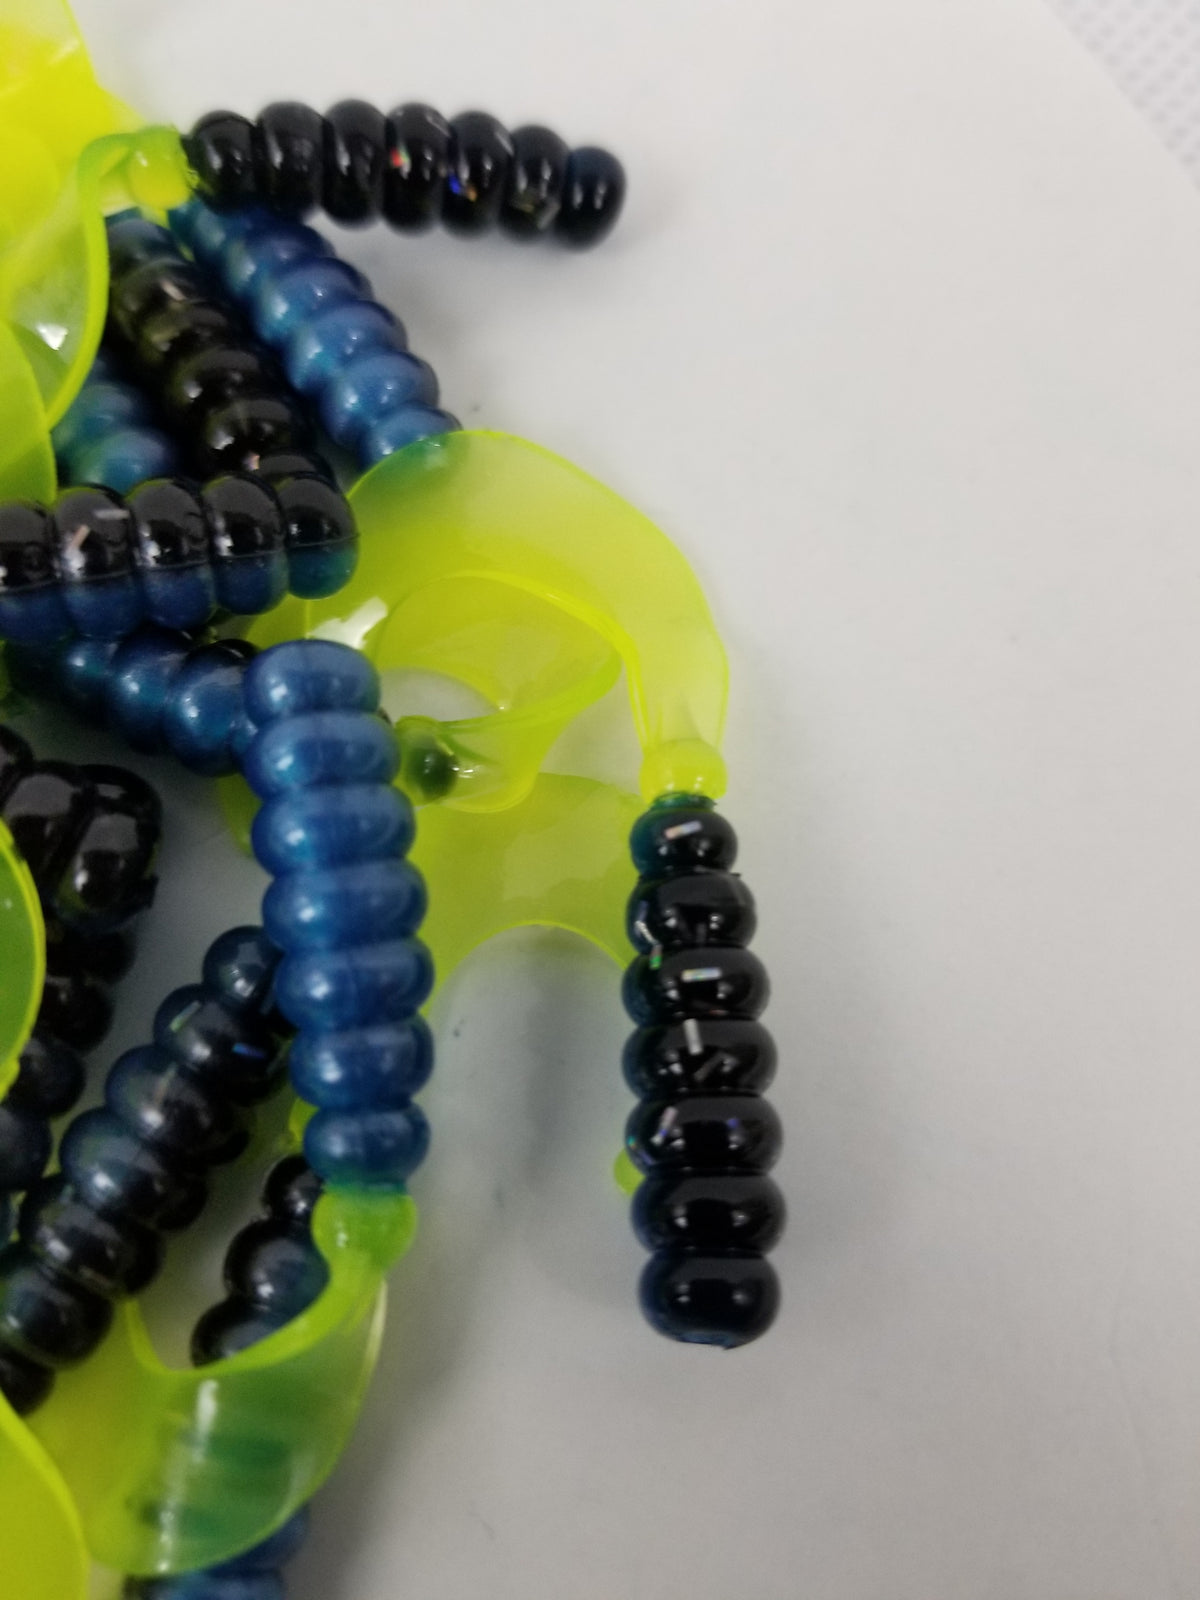 Cam's 2"(HOLOGRAM FLAKE)  Curly Tail Grub 40pc Blue Black & Chartreuse Curly Tail Crappie Soft Jigs  [A Cam's Exclusive]